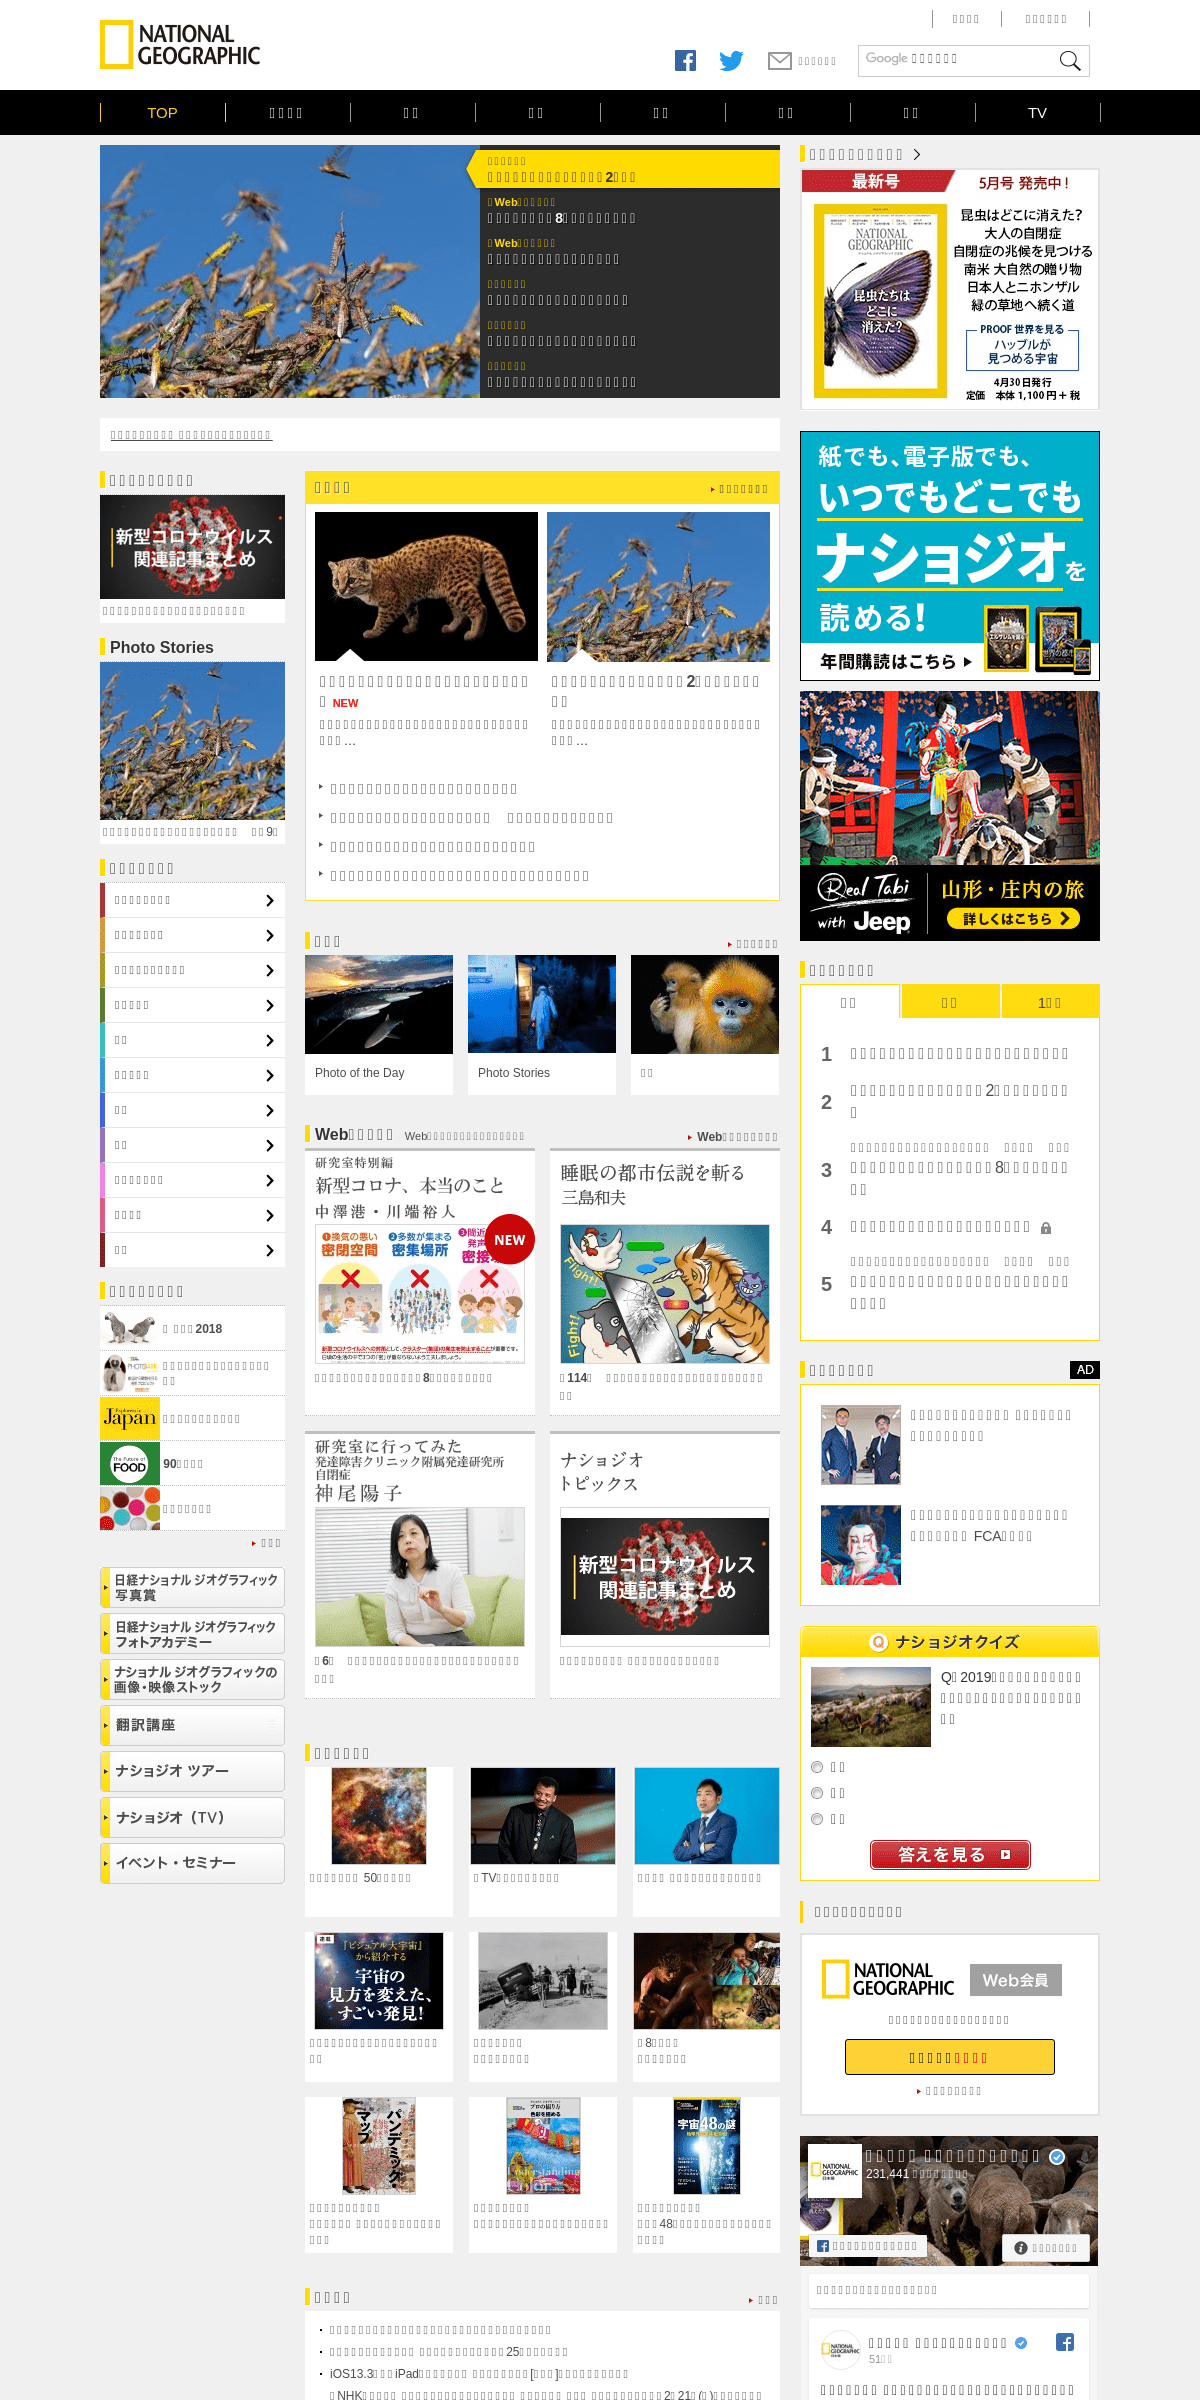 A complete backup of nationalgeographic.jp